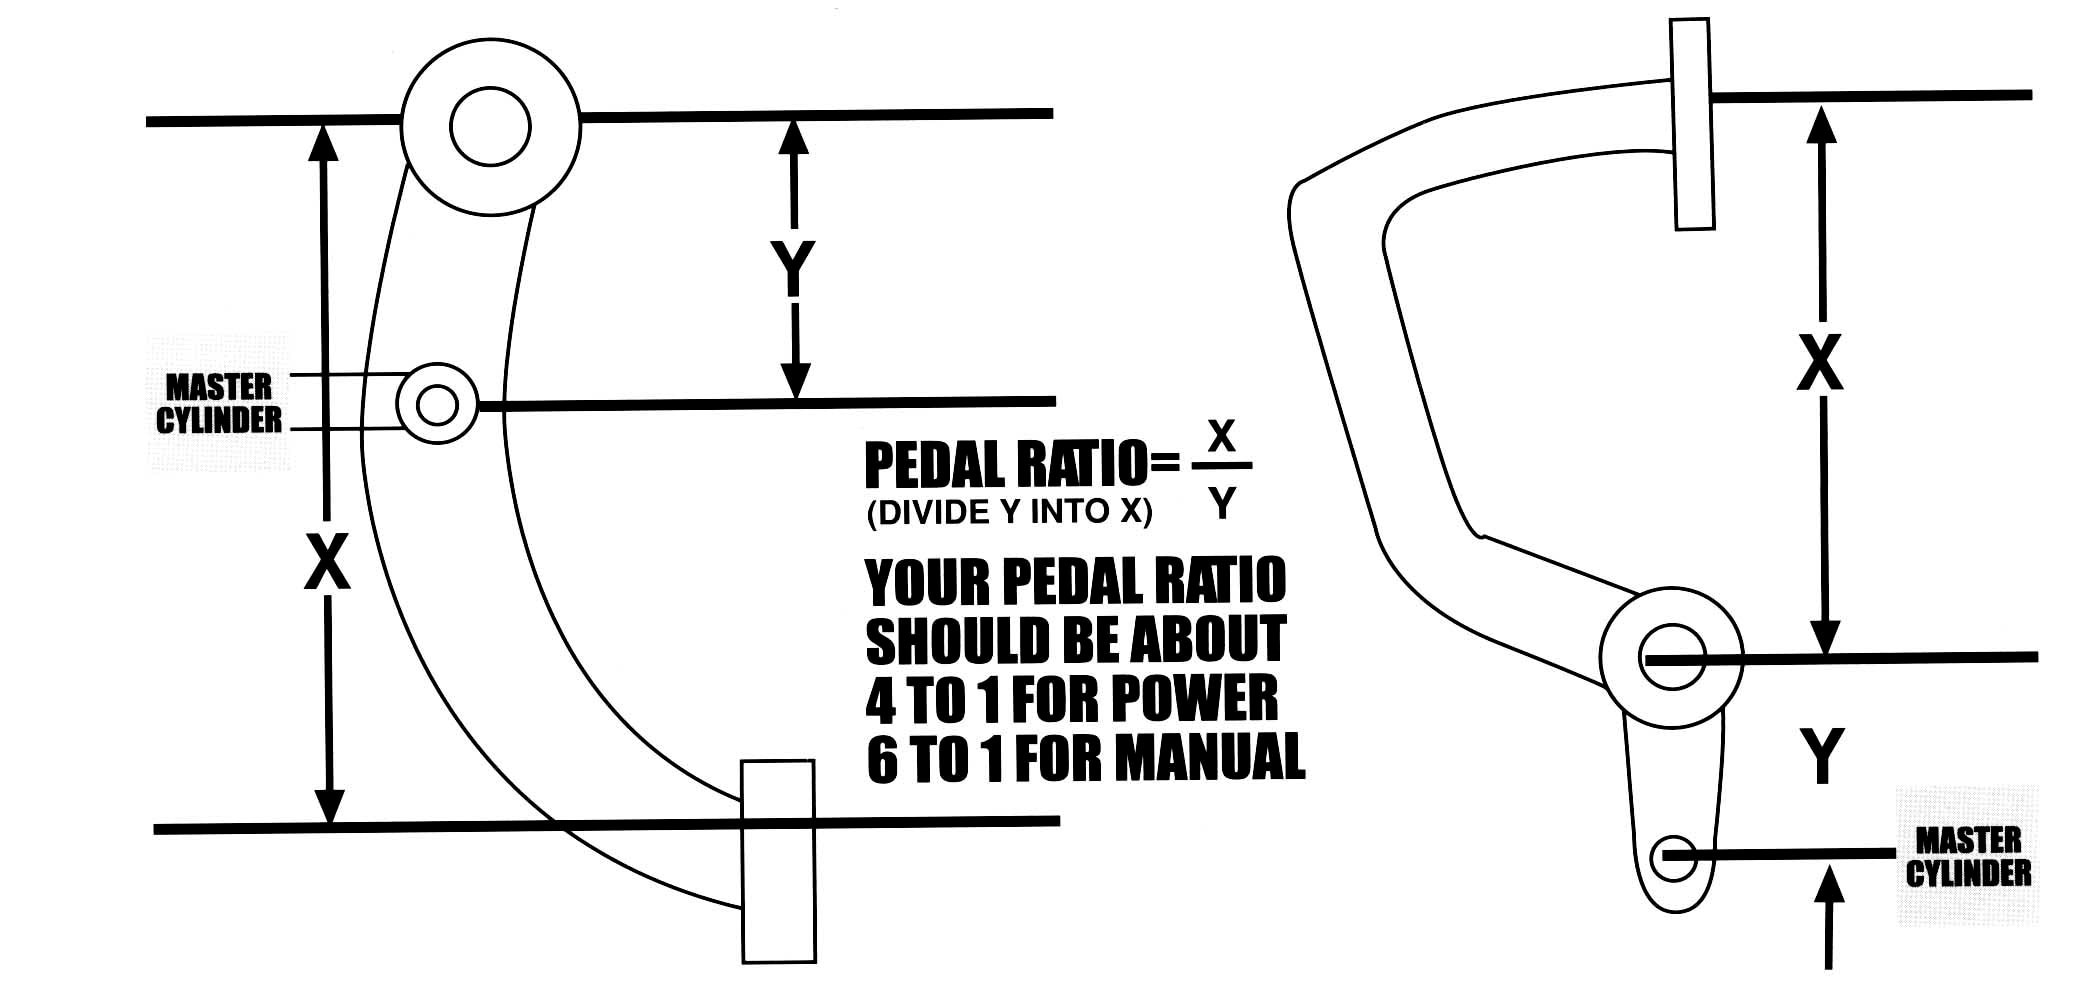 Chevy Master Cylinder Diagram Selecting and Installing Brake System Ponents Proper Plumbing Of Chevy Master Cylinder Diagram